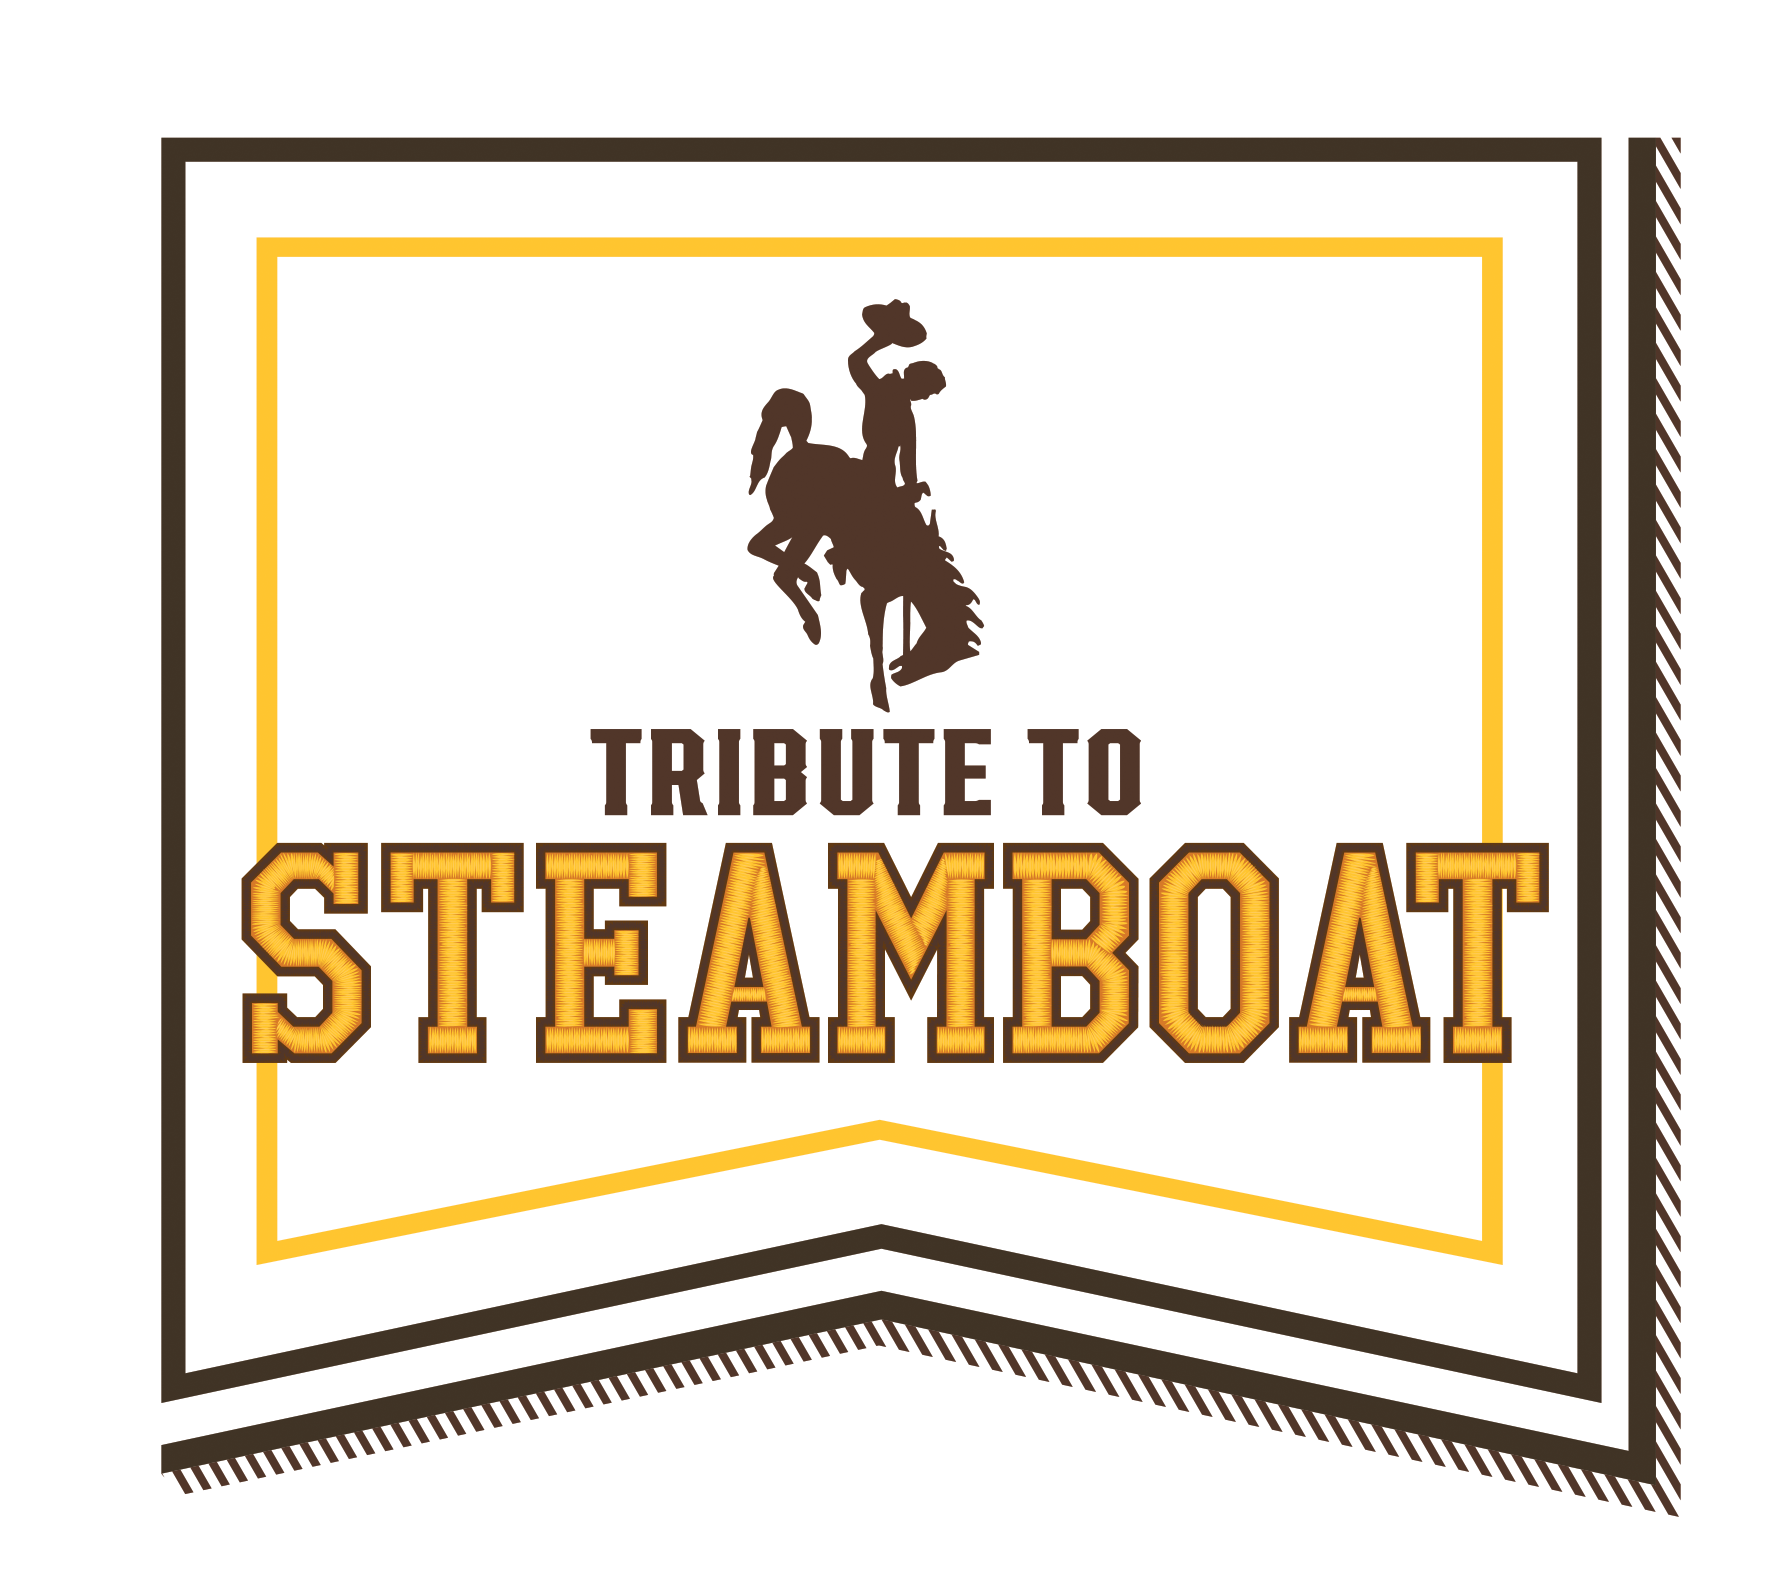 Tribute to Steamboat